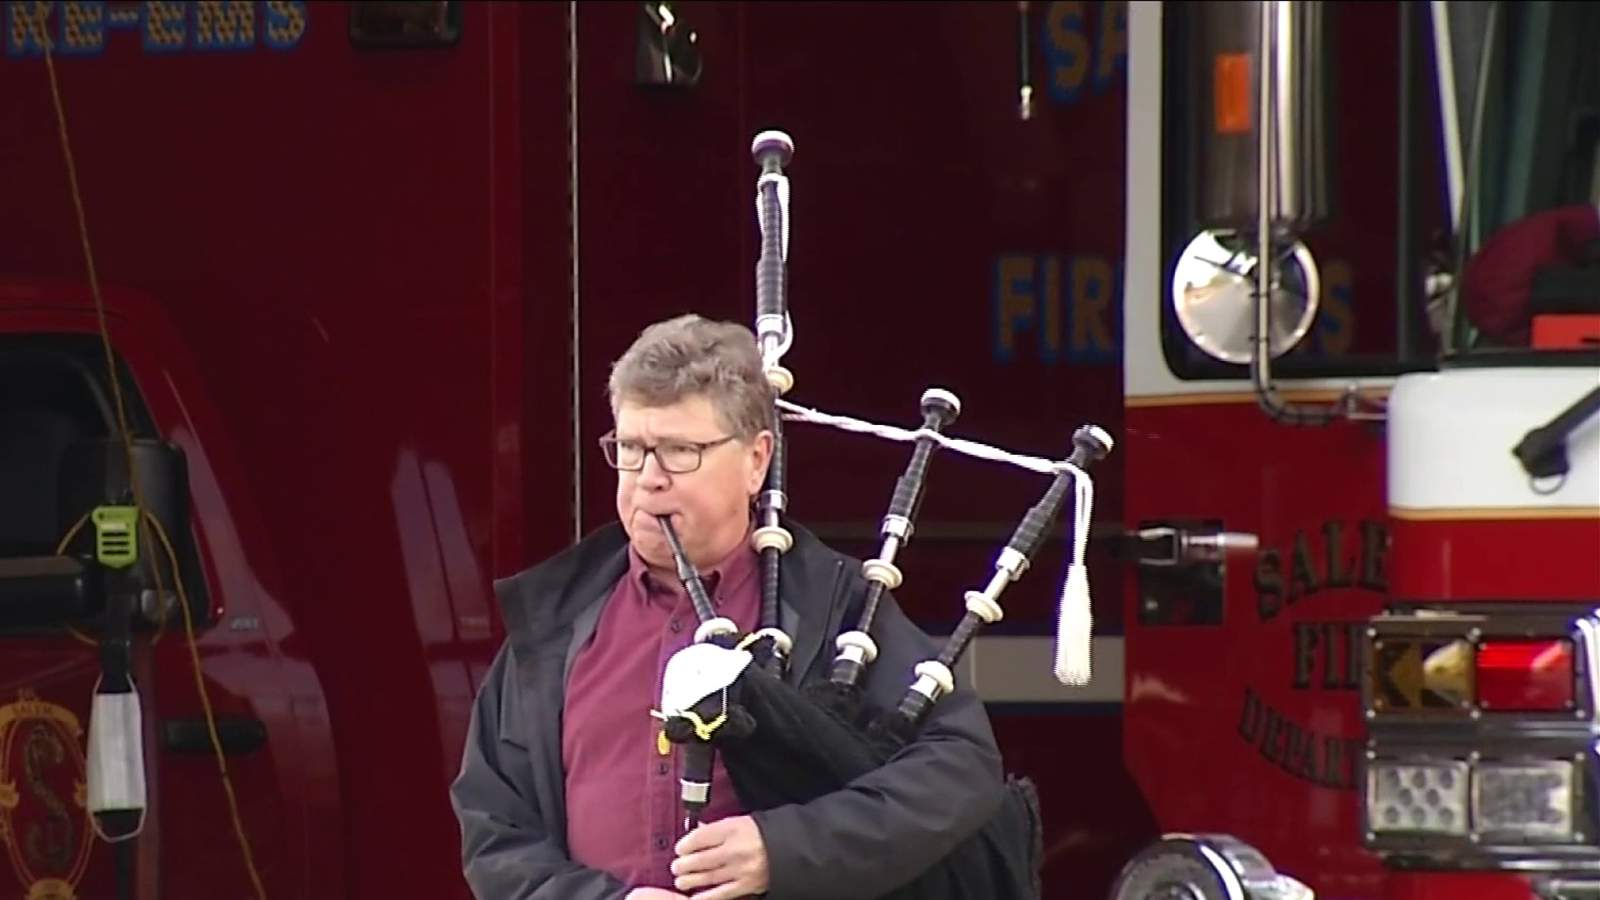 Salem fire station turns into stage for bagpipe and drums group